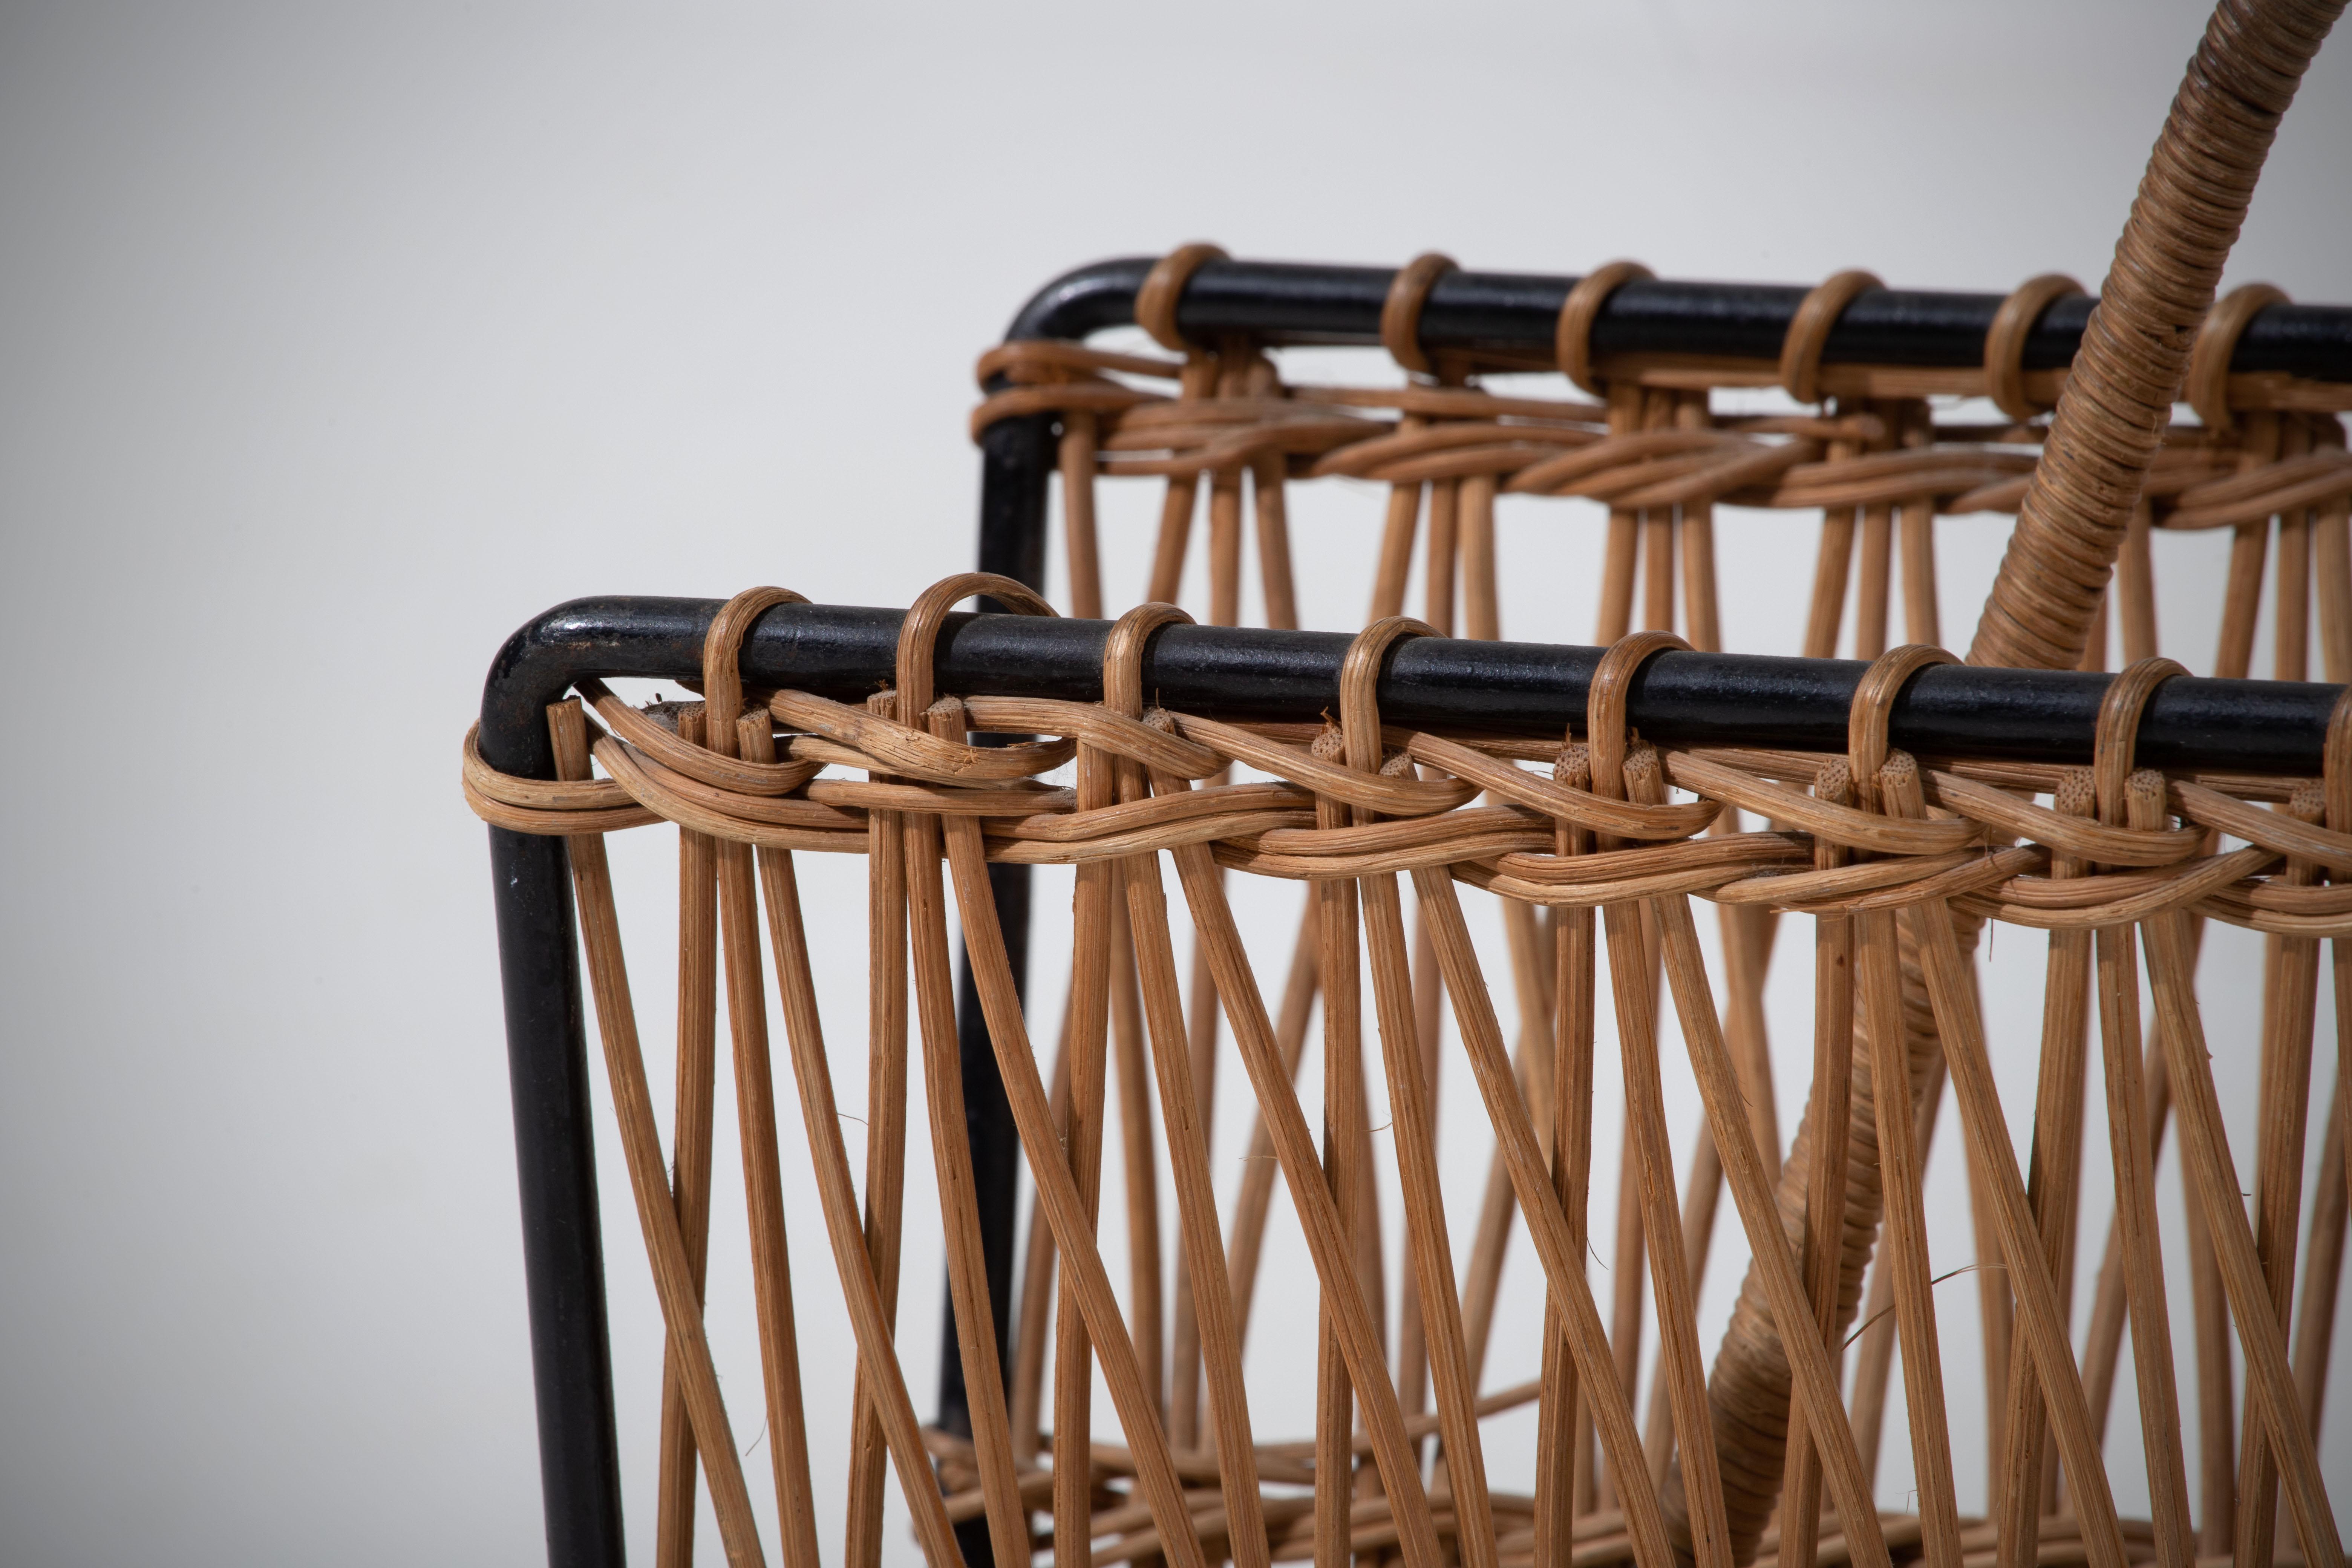 Jacques Adnet Wicker Magazine Rack with Black Iron Frame, Brass Ball Feet, 1950s For Sale 3